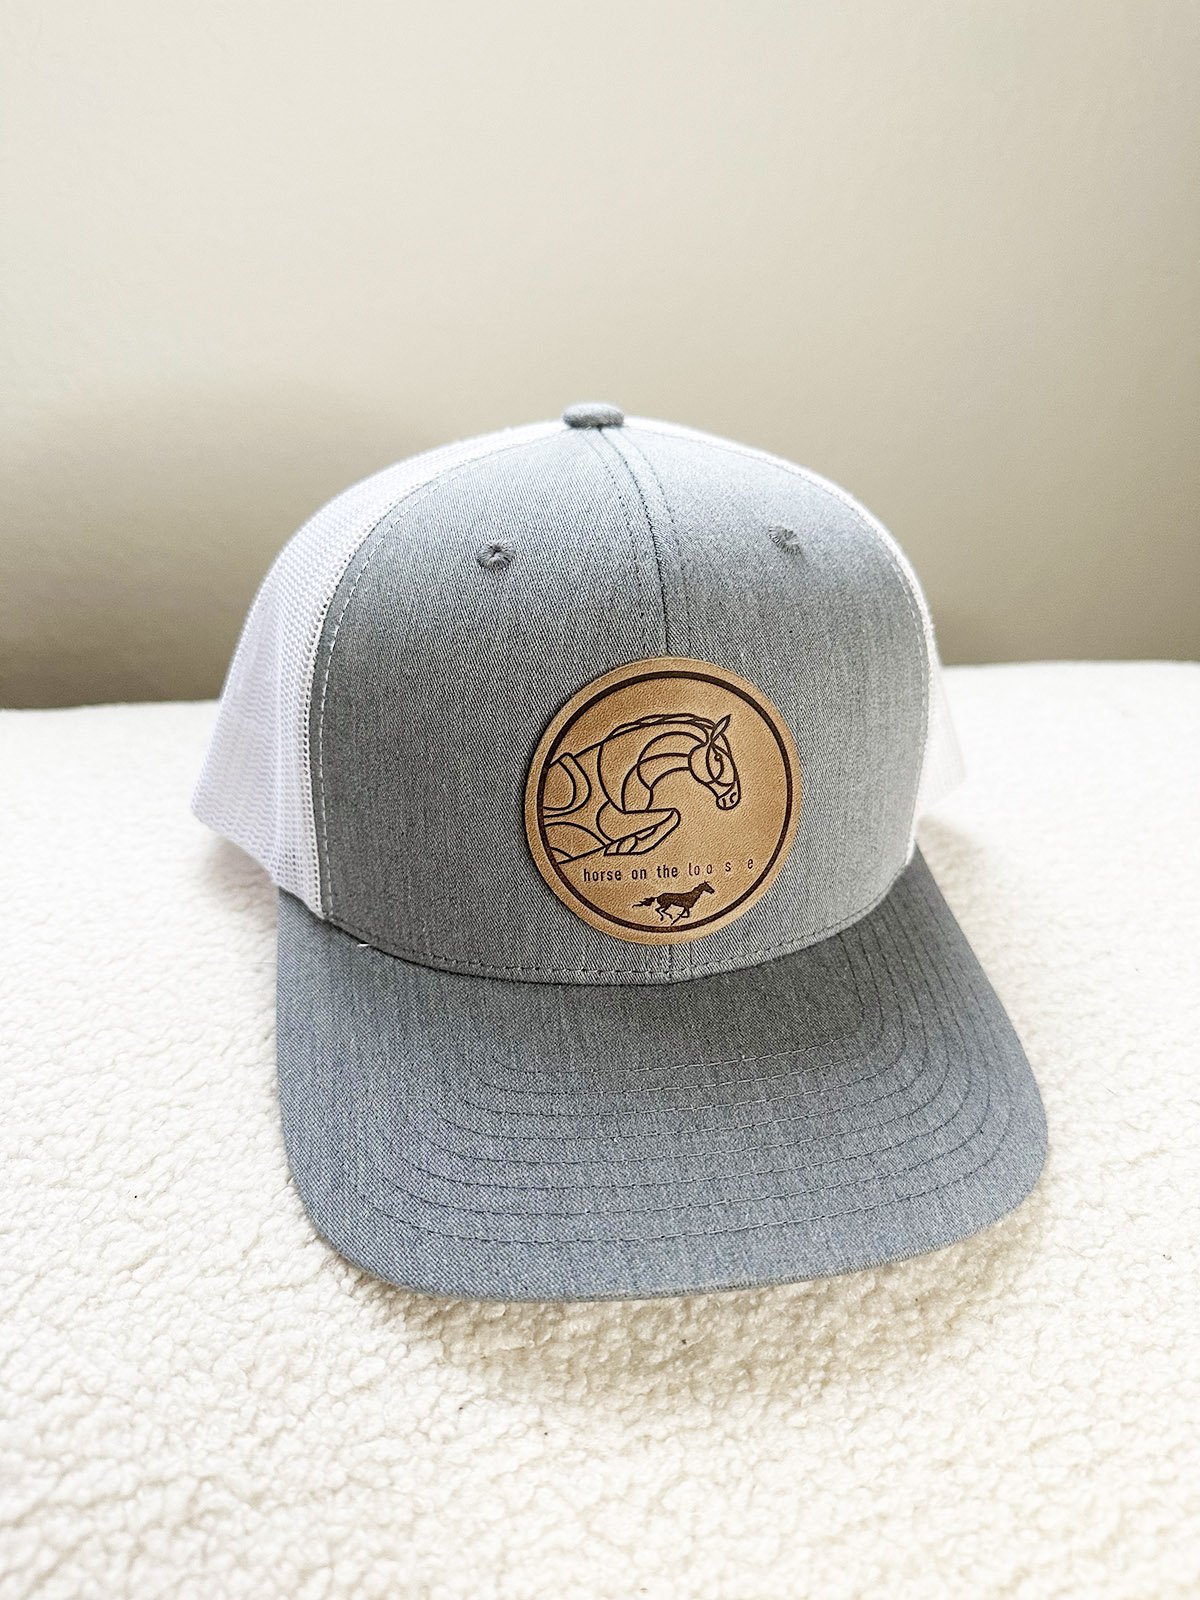 Leather Patch Baseball Cap Heather Grey — horse on the loo s e 